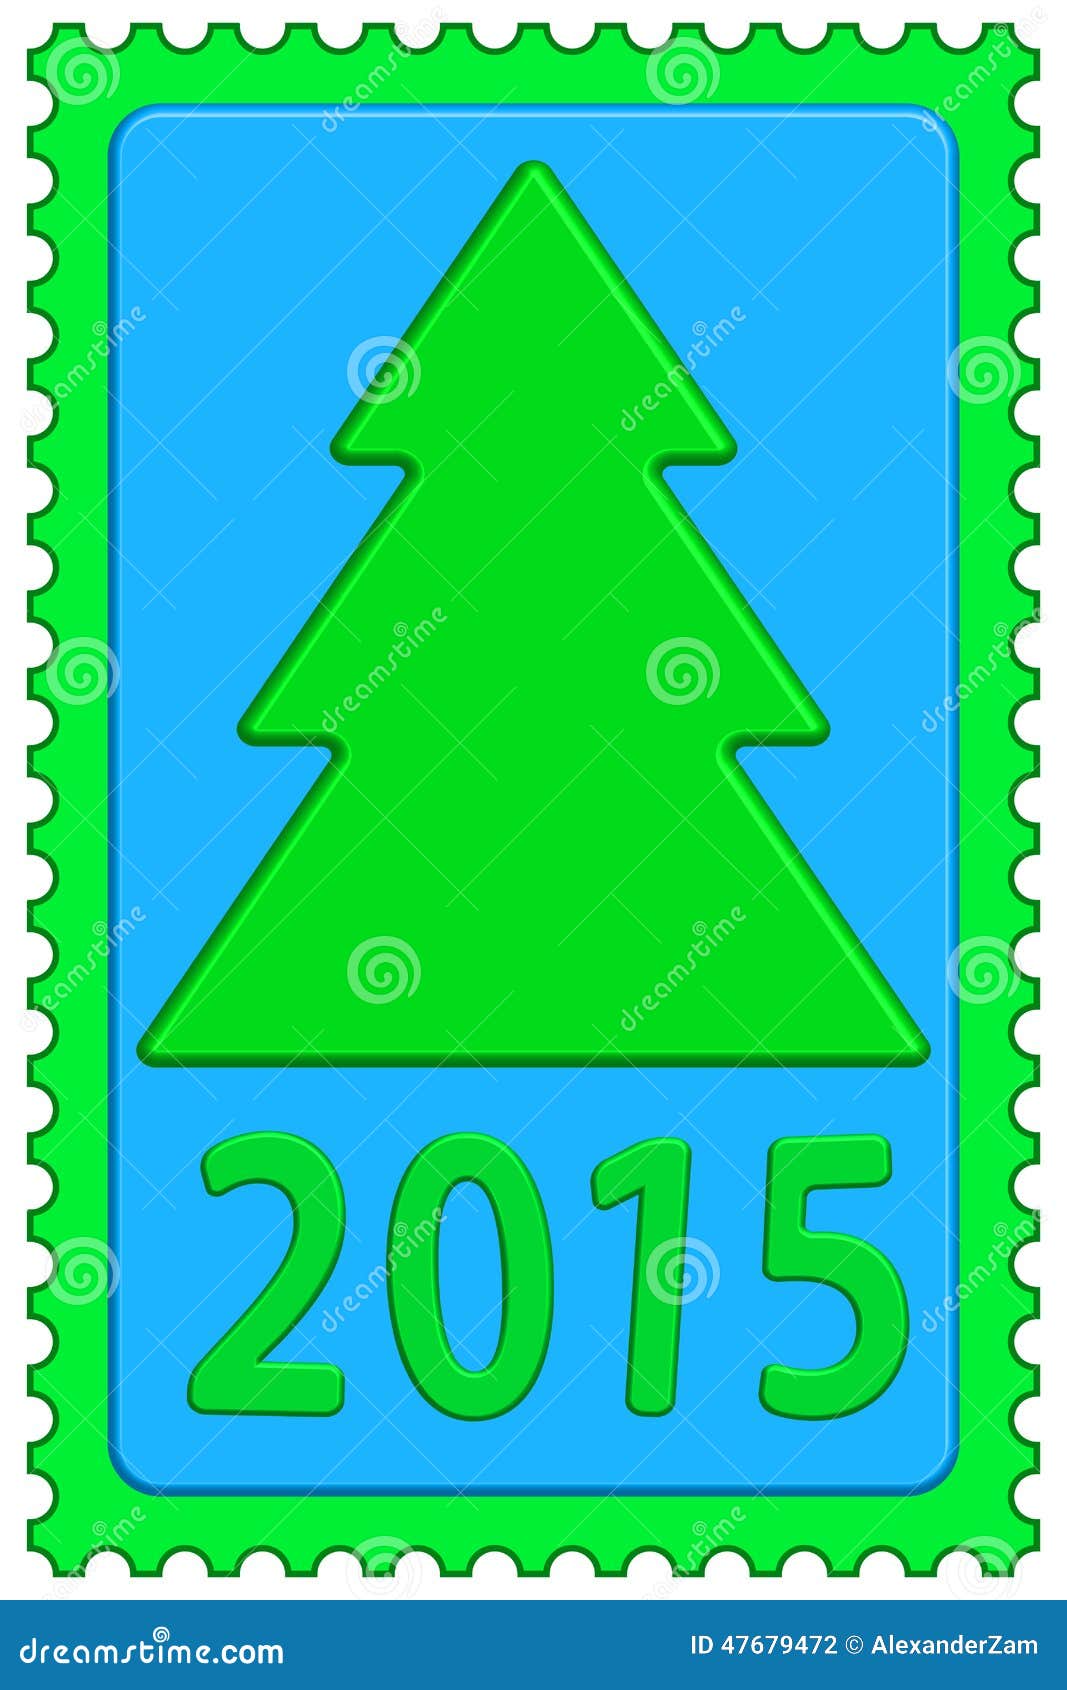 New year on stamp. Illustration of the Christmas tree and new year 2015 symbol